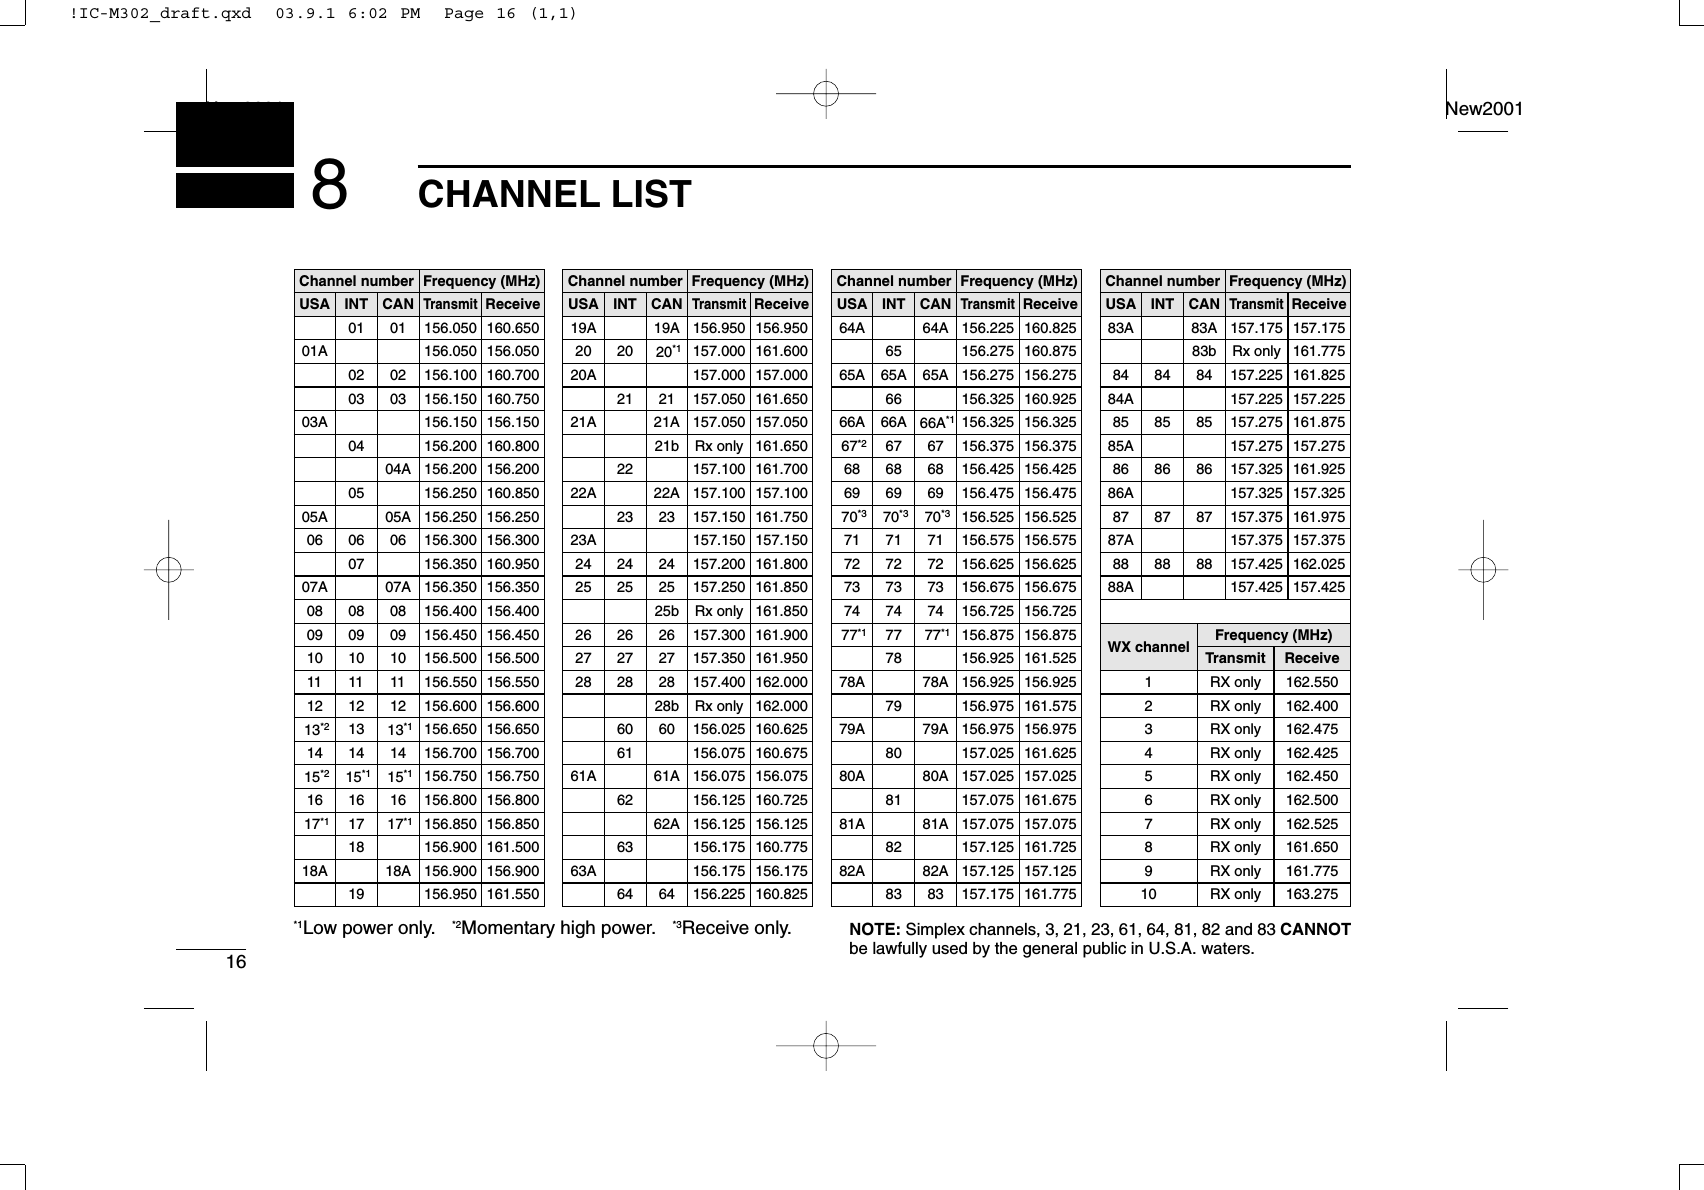 16CHANNEL LISTNew2001New20018Channel numberUSA CANTransmitReceive01 156.050 160.65001A 156.050 156.05002 156.100 160.70003 156.150 160.75003A 156.150 156.150156.200 160.80004A 156.200 156.200156.250 160.85005A 05A 156.250 156.25006 06 156.300 156.300156.350 160.95007A 07A 156.350 156.35008 08 156.400 156.40009 09 156.450 156.45010 10 156.500 156.50011 11 156.550 156.55012 12 156.600 156.60013*213*1156.650 156.65014 14 156.700 156.70015*215*1156.750 156.75016 16 156.800 156.80017*117*1156.850 156.850156.900 161.50018A 18A 156.900 156.900Frequency (MHz)INT010203040506070809101112131415*1161718Channel number Frequency (MHz)USA CANTransmitReceive19A 19A 156.950 156.95020 20*1157.000 161.60021 157.050 161.65021A 21A 157.050 157.050157.100 161.70022A 22A 157.100 157.10023 157.150 161.75023A 157.150 157.15024 24 157.200 161.80025 25 157.250 161.85026 26 157.300 161.90027 27 157.350 161.95028 28 157.400 162.00060 156.025 160.625156.075 160.67561A 61A 156.075 156.075156.125 160.72562A 156.125 156.125156.175 160.77563A 156.175 156.17564 156.225 160.825INT202122232425262728606162636420A 157.000 157.000Channel number66AFrequency (MHz)66A*1USA CANTransmitReceive64A 64A 156.225 160.82565A 65A 156.275 156.275156.325 160.92567*267 156.375 156.37568 68 156.425 156.42569 69 156.475 156.47570*370*3156.525 156.52571 71 156.575 156.57572 72 156.625 156.62573 73 156.675 156.67574 74 156.725 156.72577*177*1156.875 156.875156.925 161.52578A 78A 156.925 156.925156.975 161.57579A 79A 156.975 156.975157.025 161.62580A 80A 157.025 157.025157.075 161.67581A 81A 157.075 157.075157.125 161.72582A 82A 157.125 157.125INT65A6667686970*371727374777879808182156.325 156.32566AChannel number84AFrequency (MHz)USA CANTransmitReceive83A 83A 157.175 157.17584 84 157.225 161.82585 85 157.275 161.87585A 157.275 157.27586 86 157.325 161.92586A 157.325 157.32587 87 157.375 161.97587A 157.375 157.37588 88 157.425 162.02588A 157.425 157.425INT8485868788157.225 157.225WX channel4Frequency (MHz)Transmit Receive1 RX only 162.5502 RX only 162.4003 RX only 162.4755 RX only 162.4506 RX only 162.5007 RX only 162.5258 RX only 161.6509 RX only 161.77510 RX only 163.275RX only 162.425*1Low power only.*3Receive only.156.950 161.5501921b Rx only 161.65025b Rx only 161.850156.275 160.8756528b Rx only 162.00083 157.175 161.7758383b Rx only 161.775*2Momentary high power.NOTE: Simplex channels, 3, 21, 23, 61, 64, 81, 82 and 83 CANNOTbe lawfully used by the general public in U.S.A. waters.!IC-M302_draft.qxd  03.9.1 6:02 PM  Page 16 (1,1)